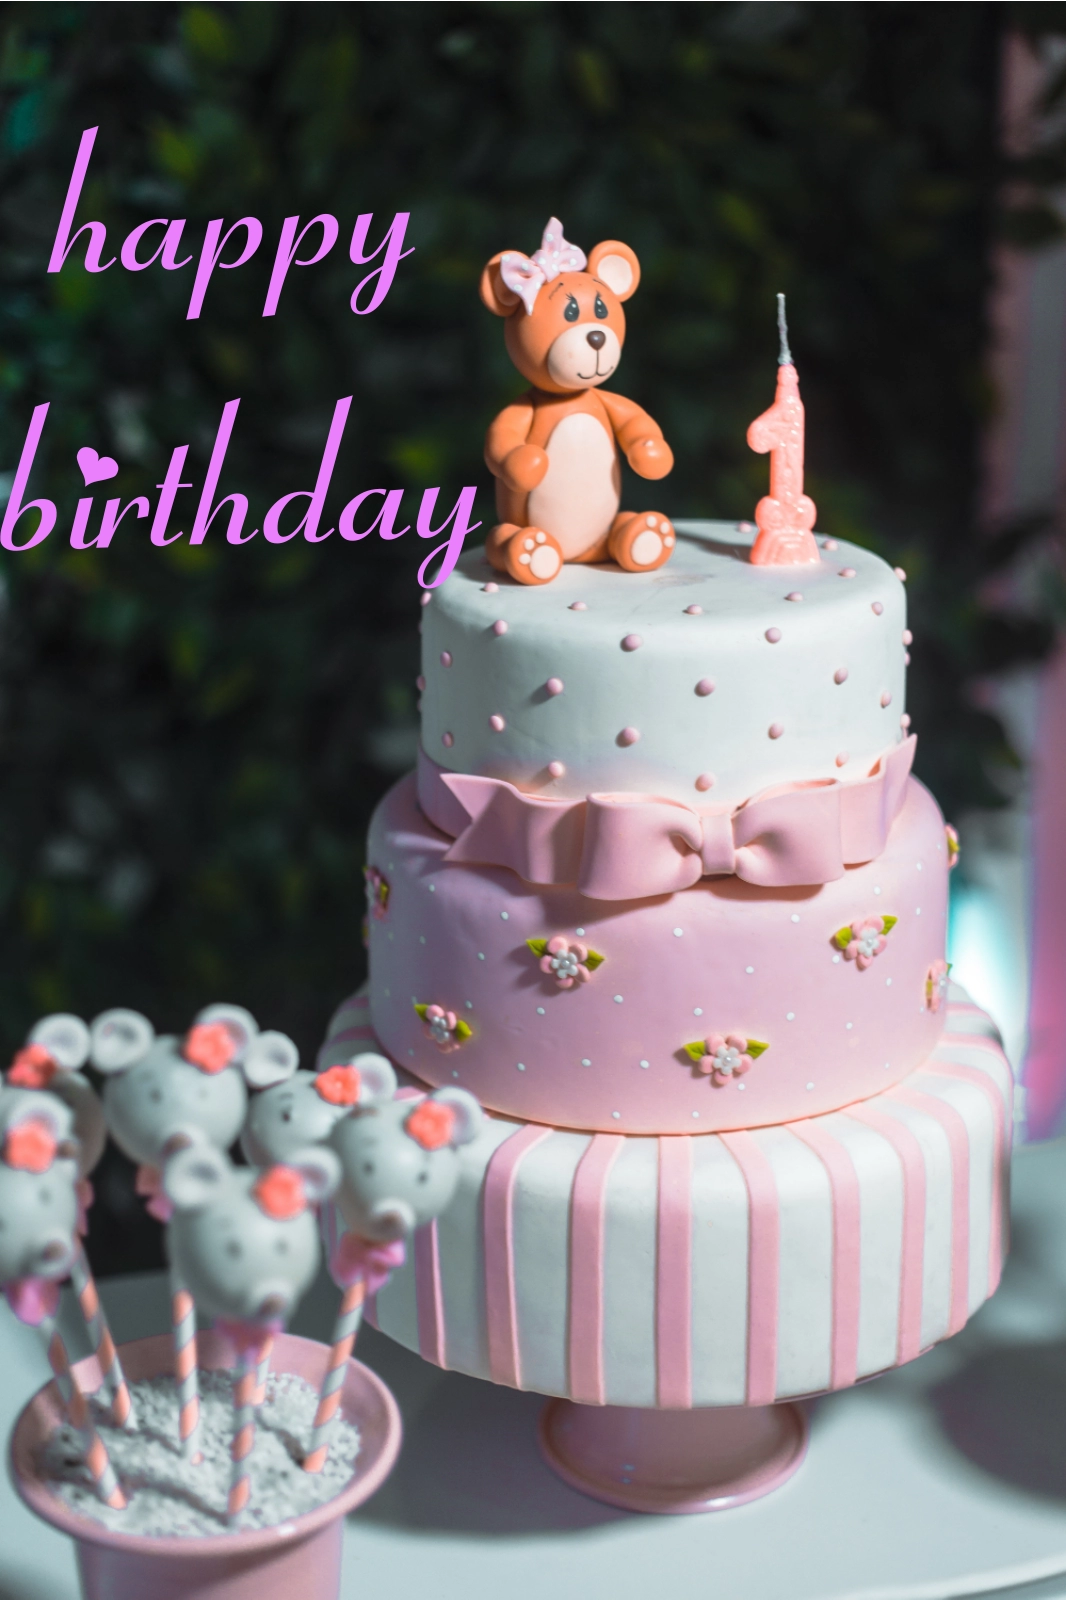 Birthday cake images download for mobile19